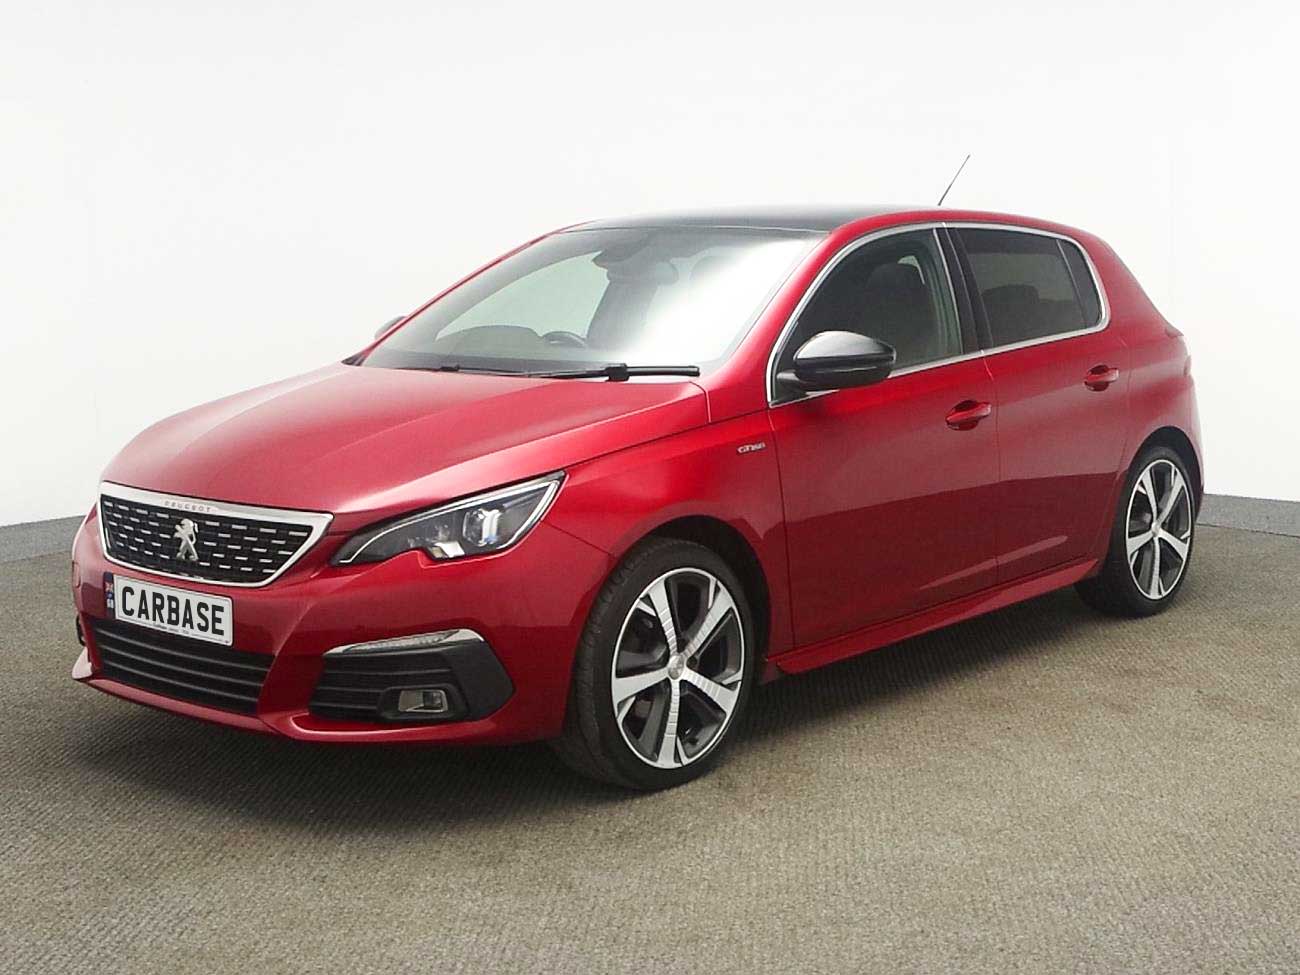 Peugeot 308 in red